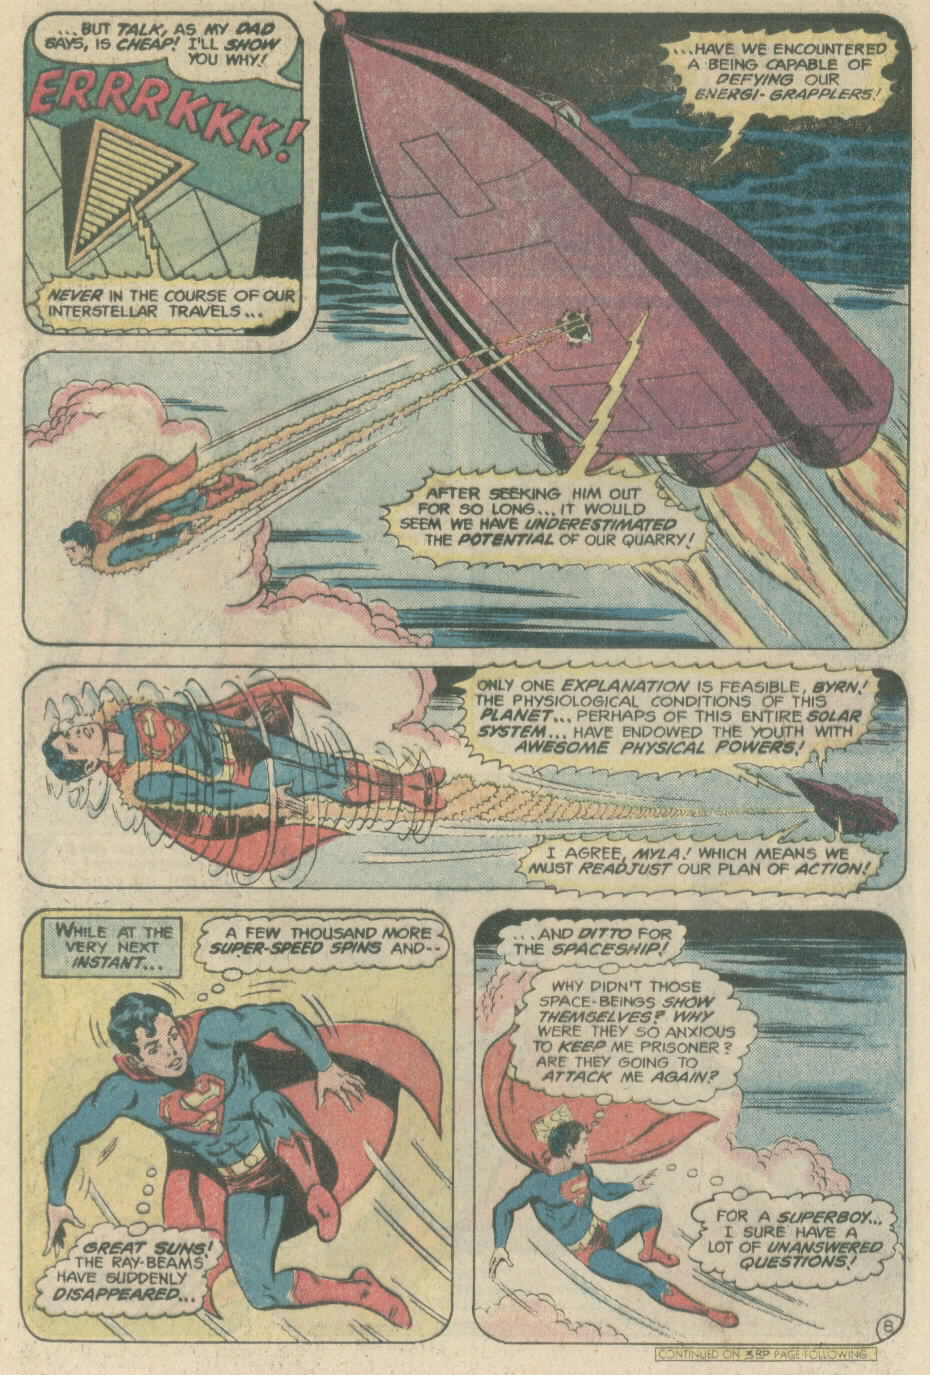 The New Adventures of Superboy 1 Page 8